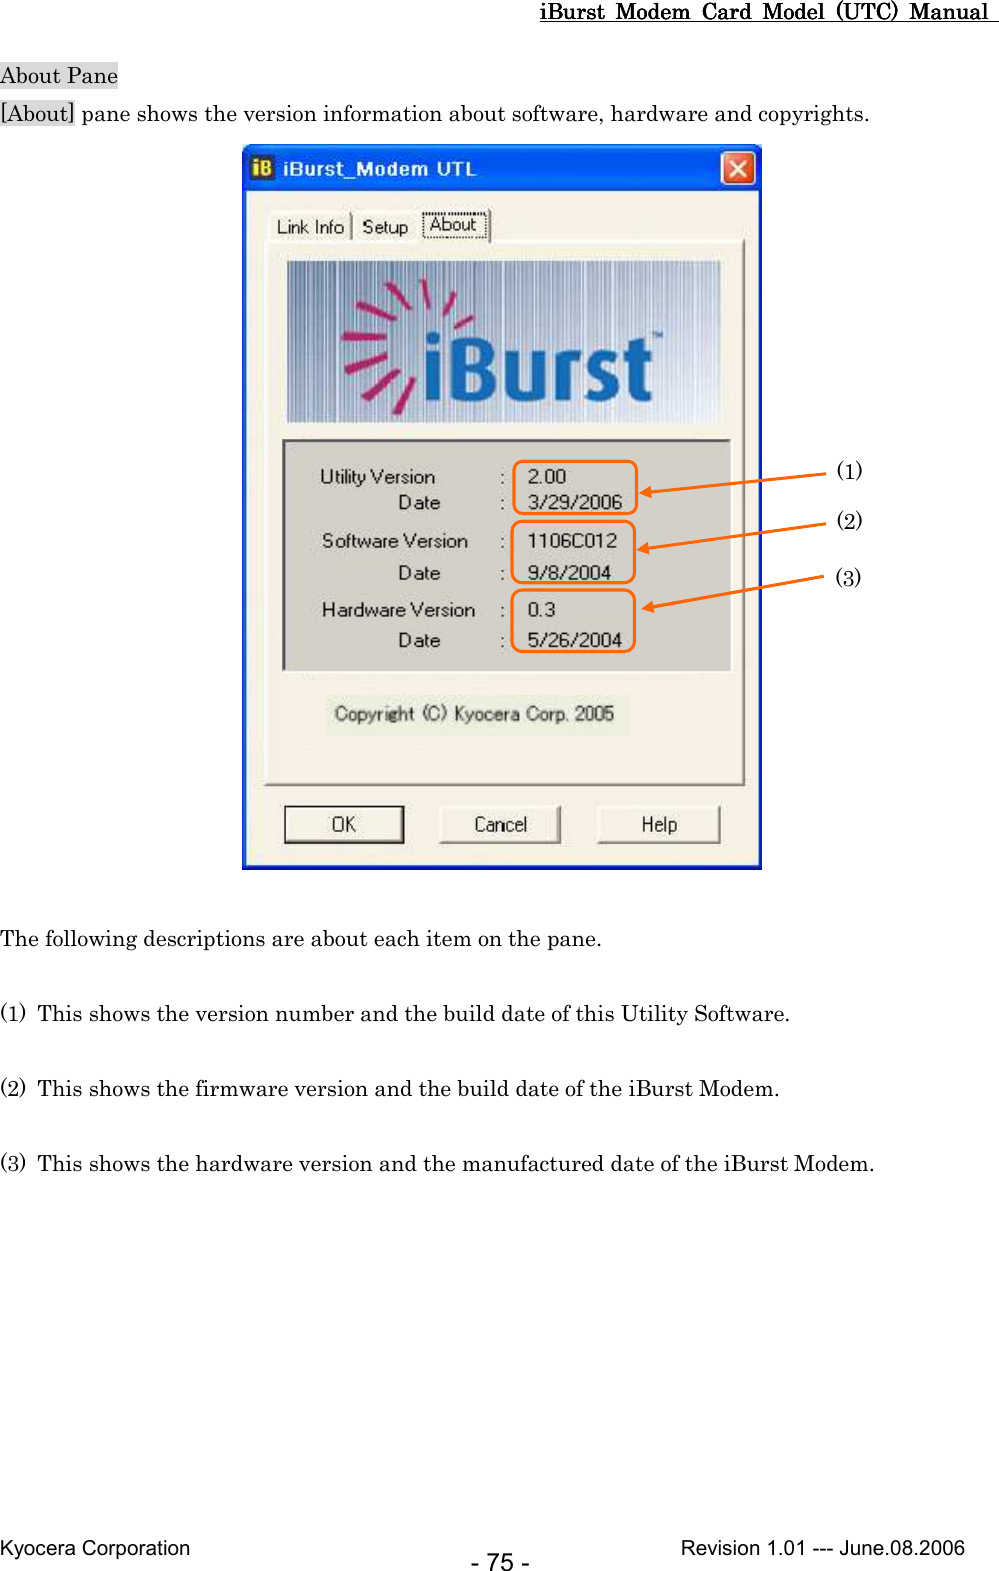 iBurst  Modem  Card  Model  (UTC)  Manual iBurst  Modem  Card  Model  (UTC)  Manual iBurst  Modem  Card  Model  (UTC)  Manual iBurst  Modem  Card  Model  (UTC)  Manual       Kyocera Corporation                                                                                              Revision 1.01 --- June.08.2006 - 75 - About Pane [About] pane shows the version information about software, hardware and copyrights.   The following descriptions are about each item on the pane.  (1) This shows the version number and the build date of this Utility Software.  (2) This shows the firmware version and the build date of the iBurst Modem.  (3) This shows the hardware version and the manufactured date of the iBurst Modem.  (1) (2) (3) 